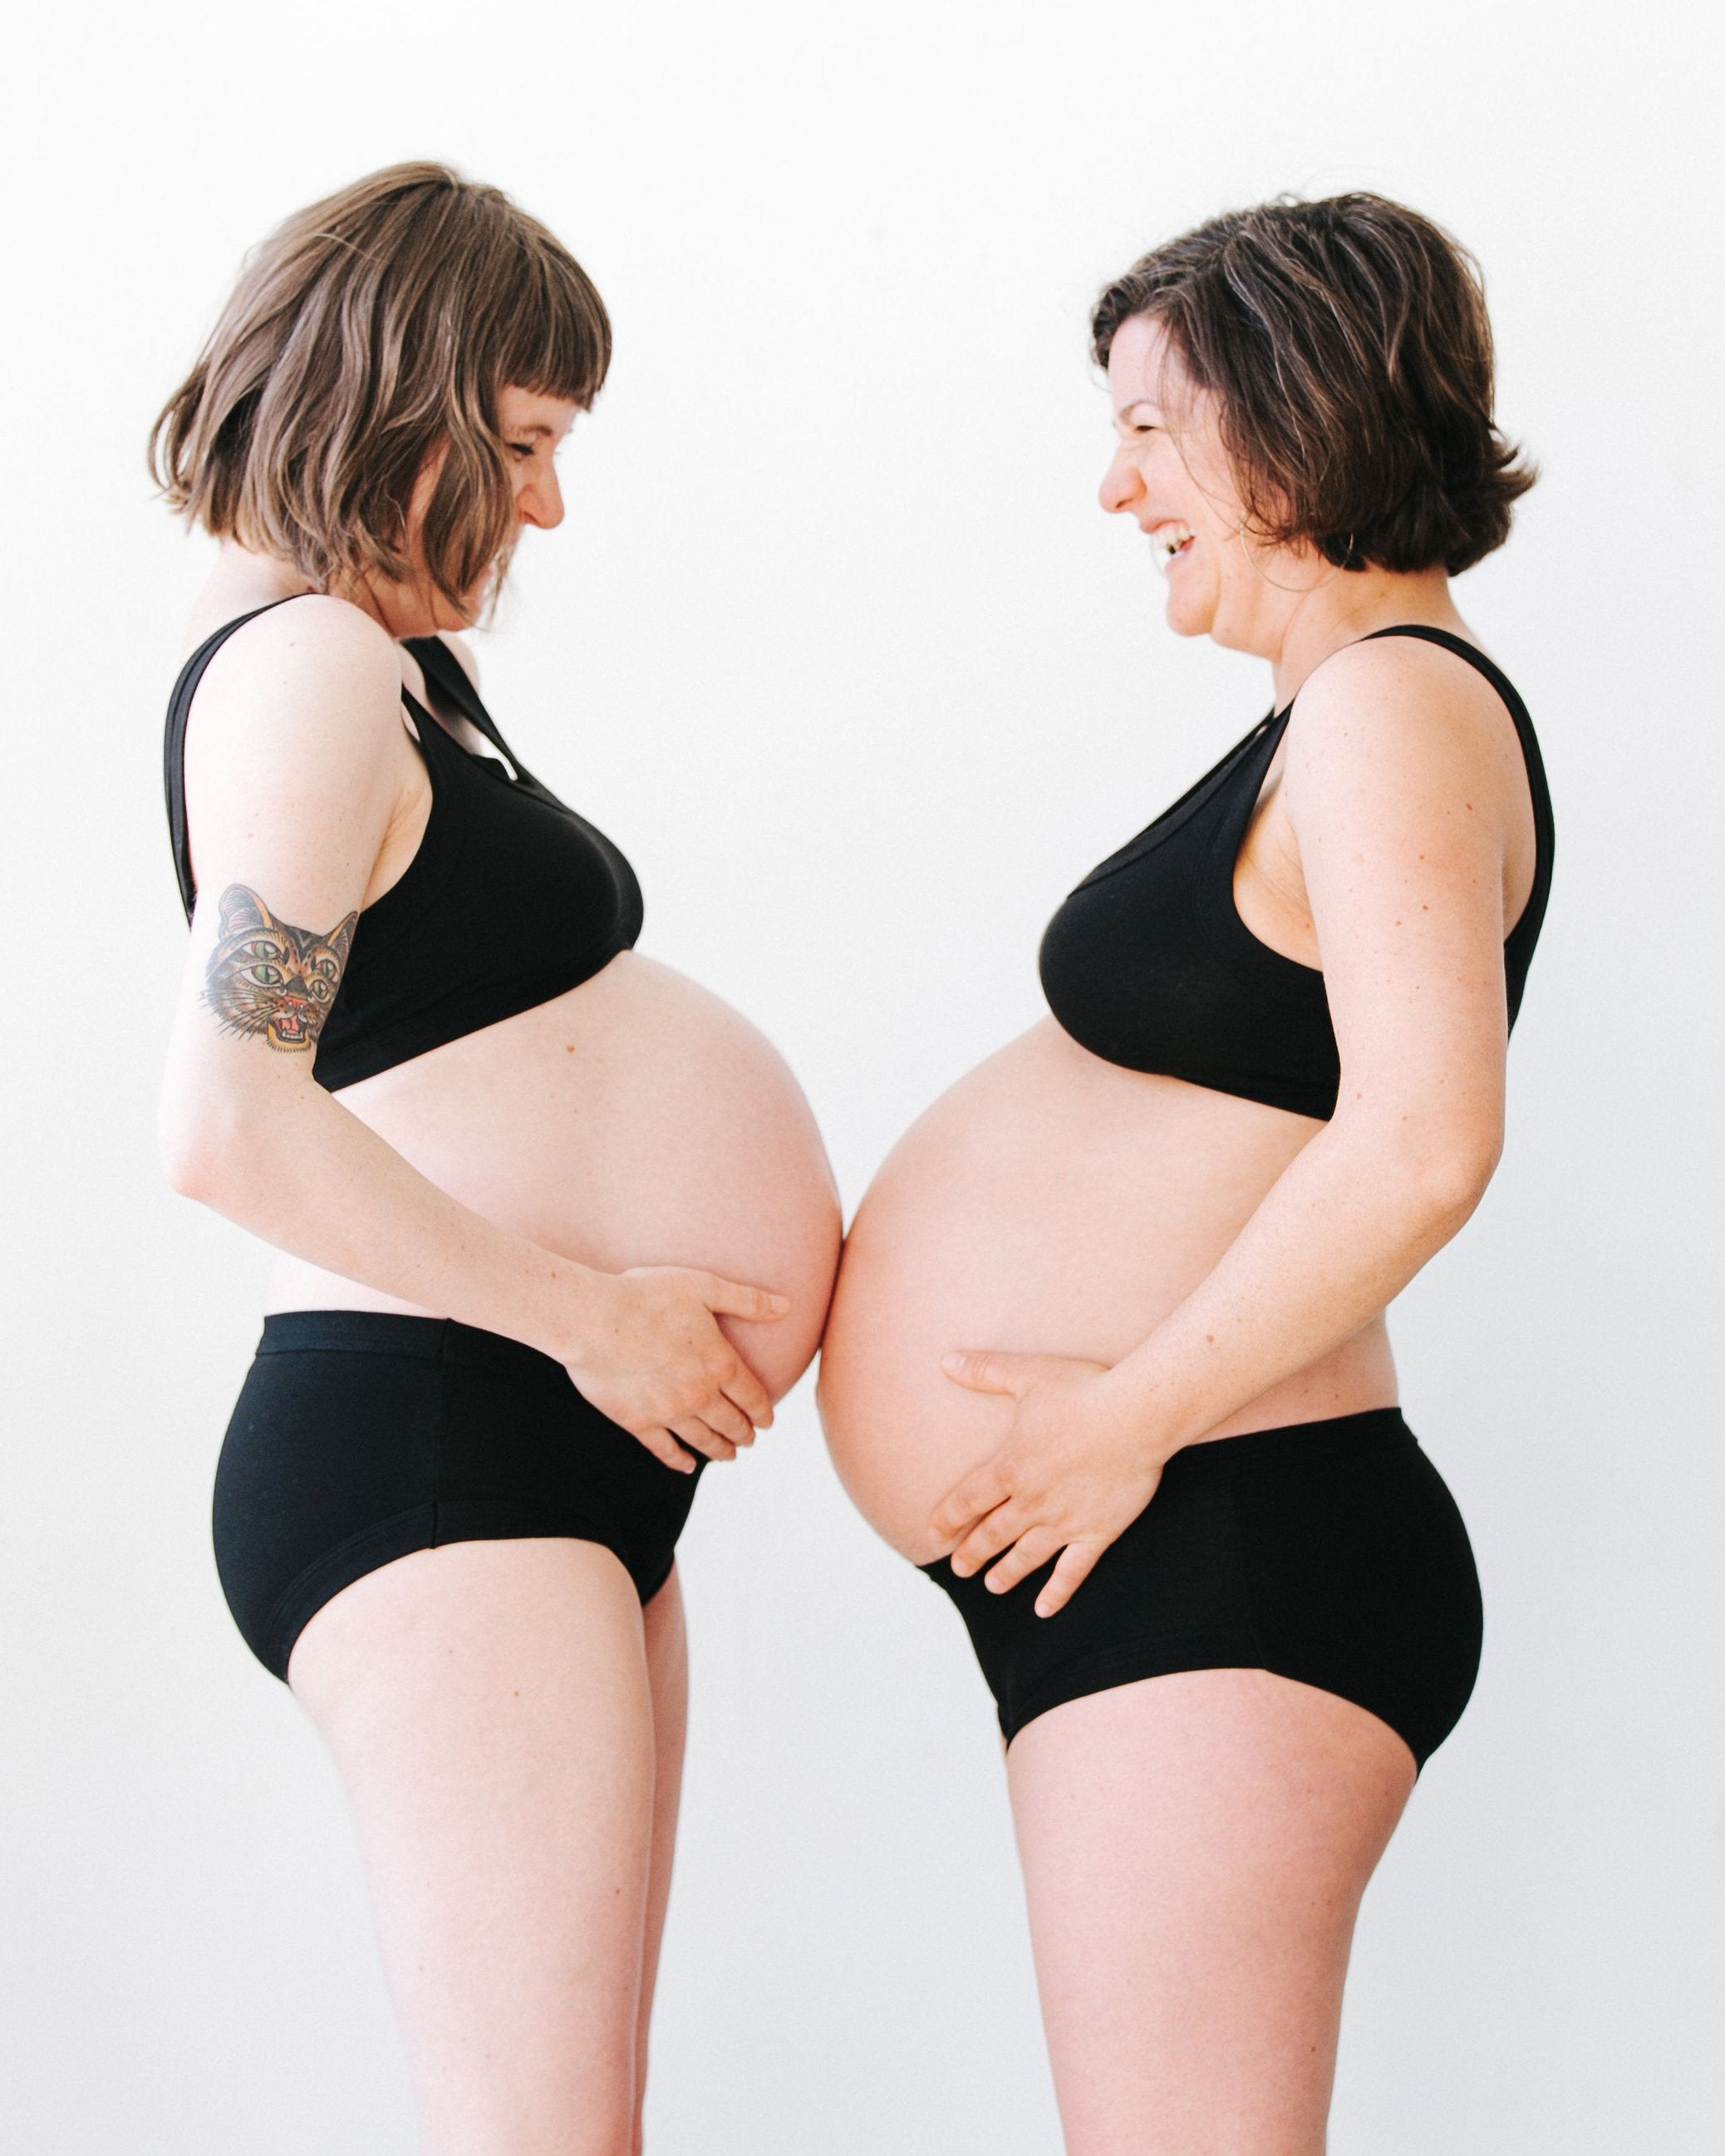 Two pregnant models standing face-to-face with their bellies touching, laughing, wearing Thunderpants organic cotton Hipster style underwear and Bralettes in plain black.